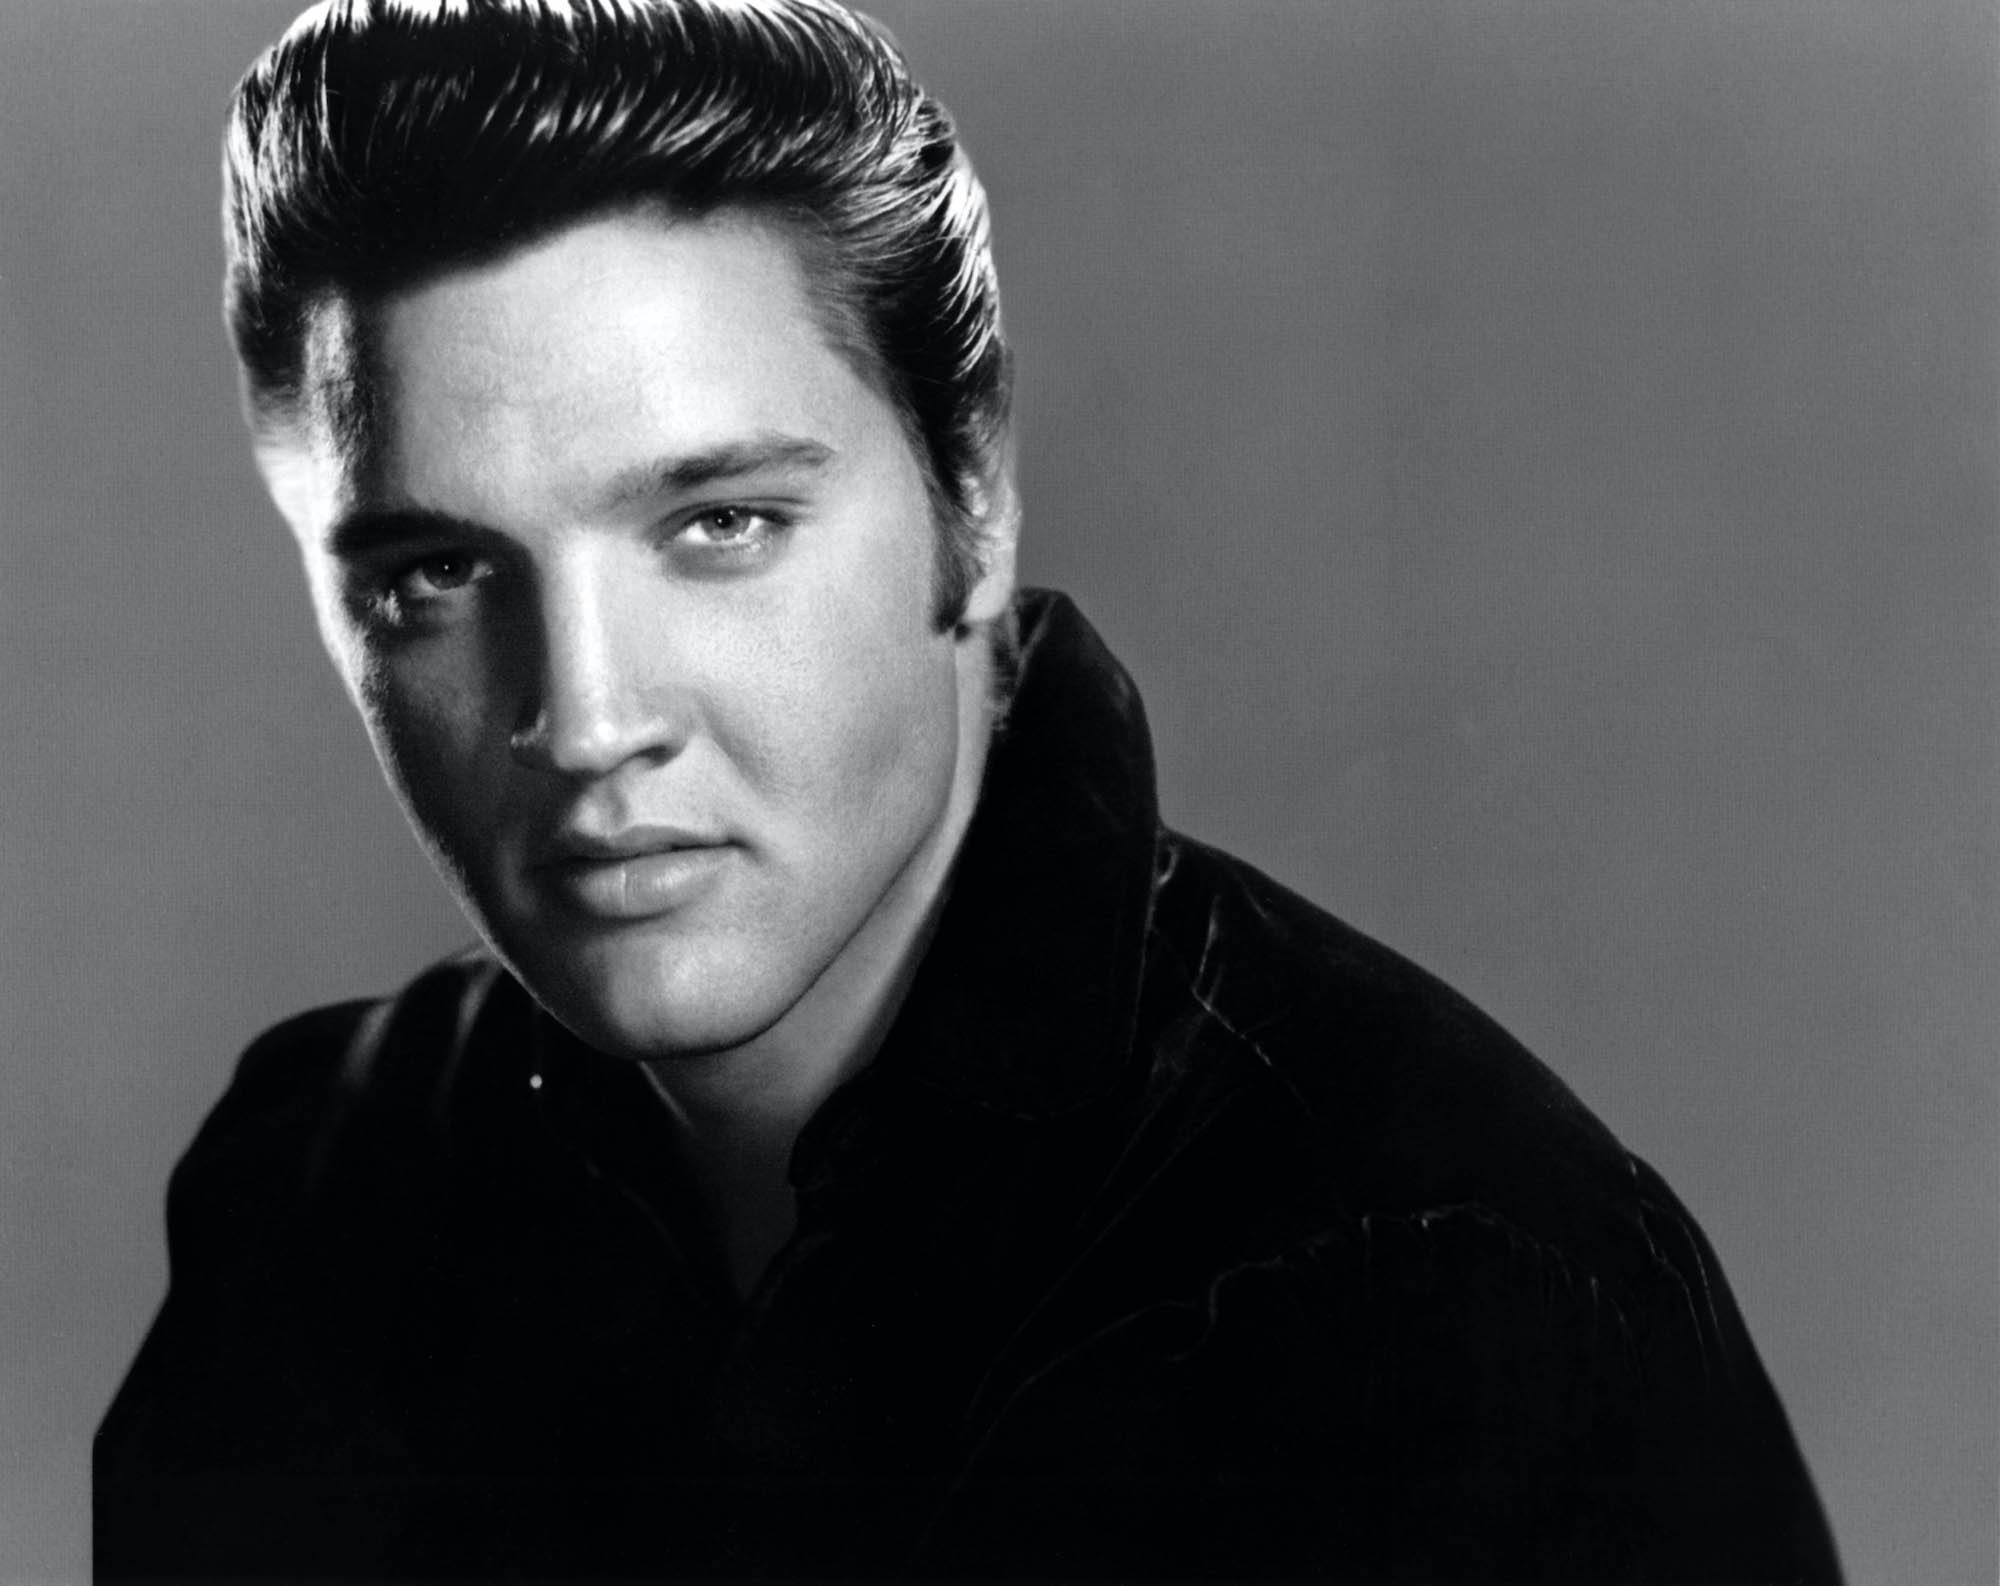 Elvis Presley with nothing in the background